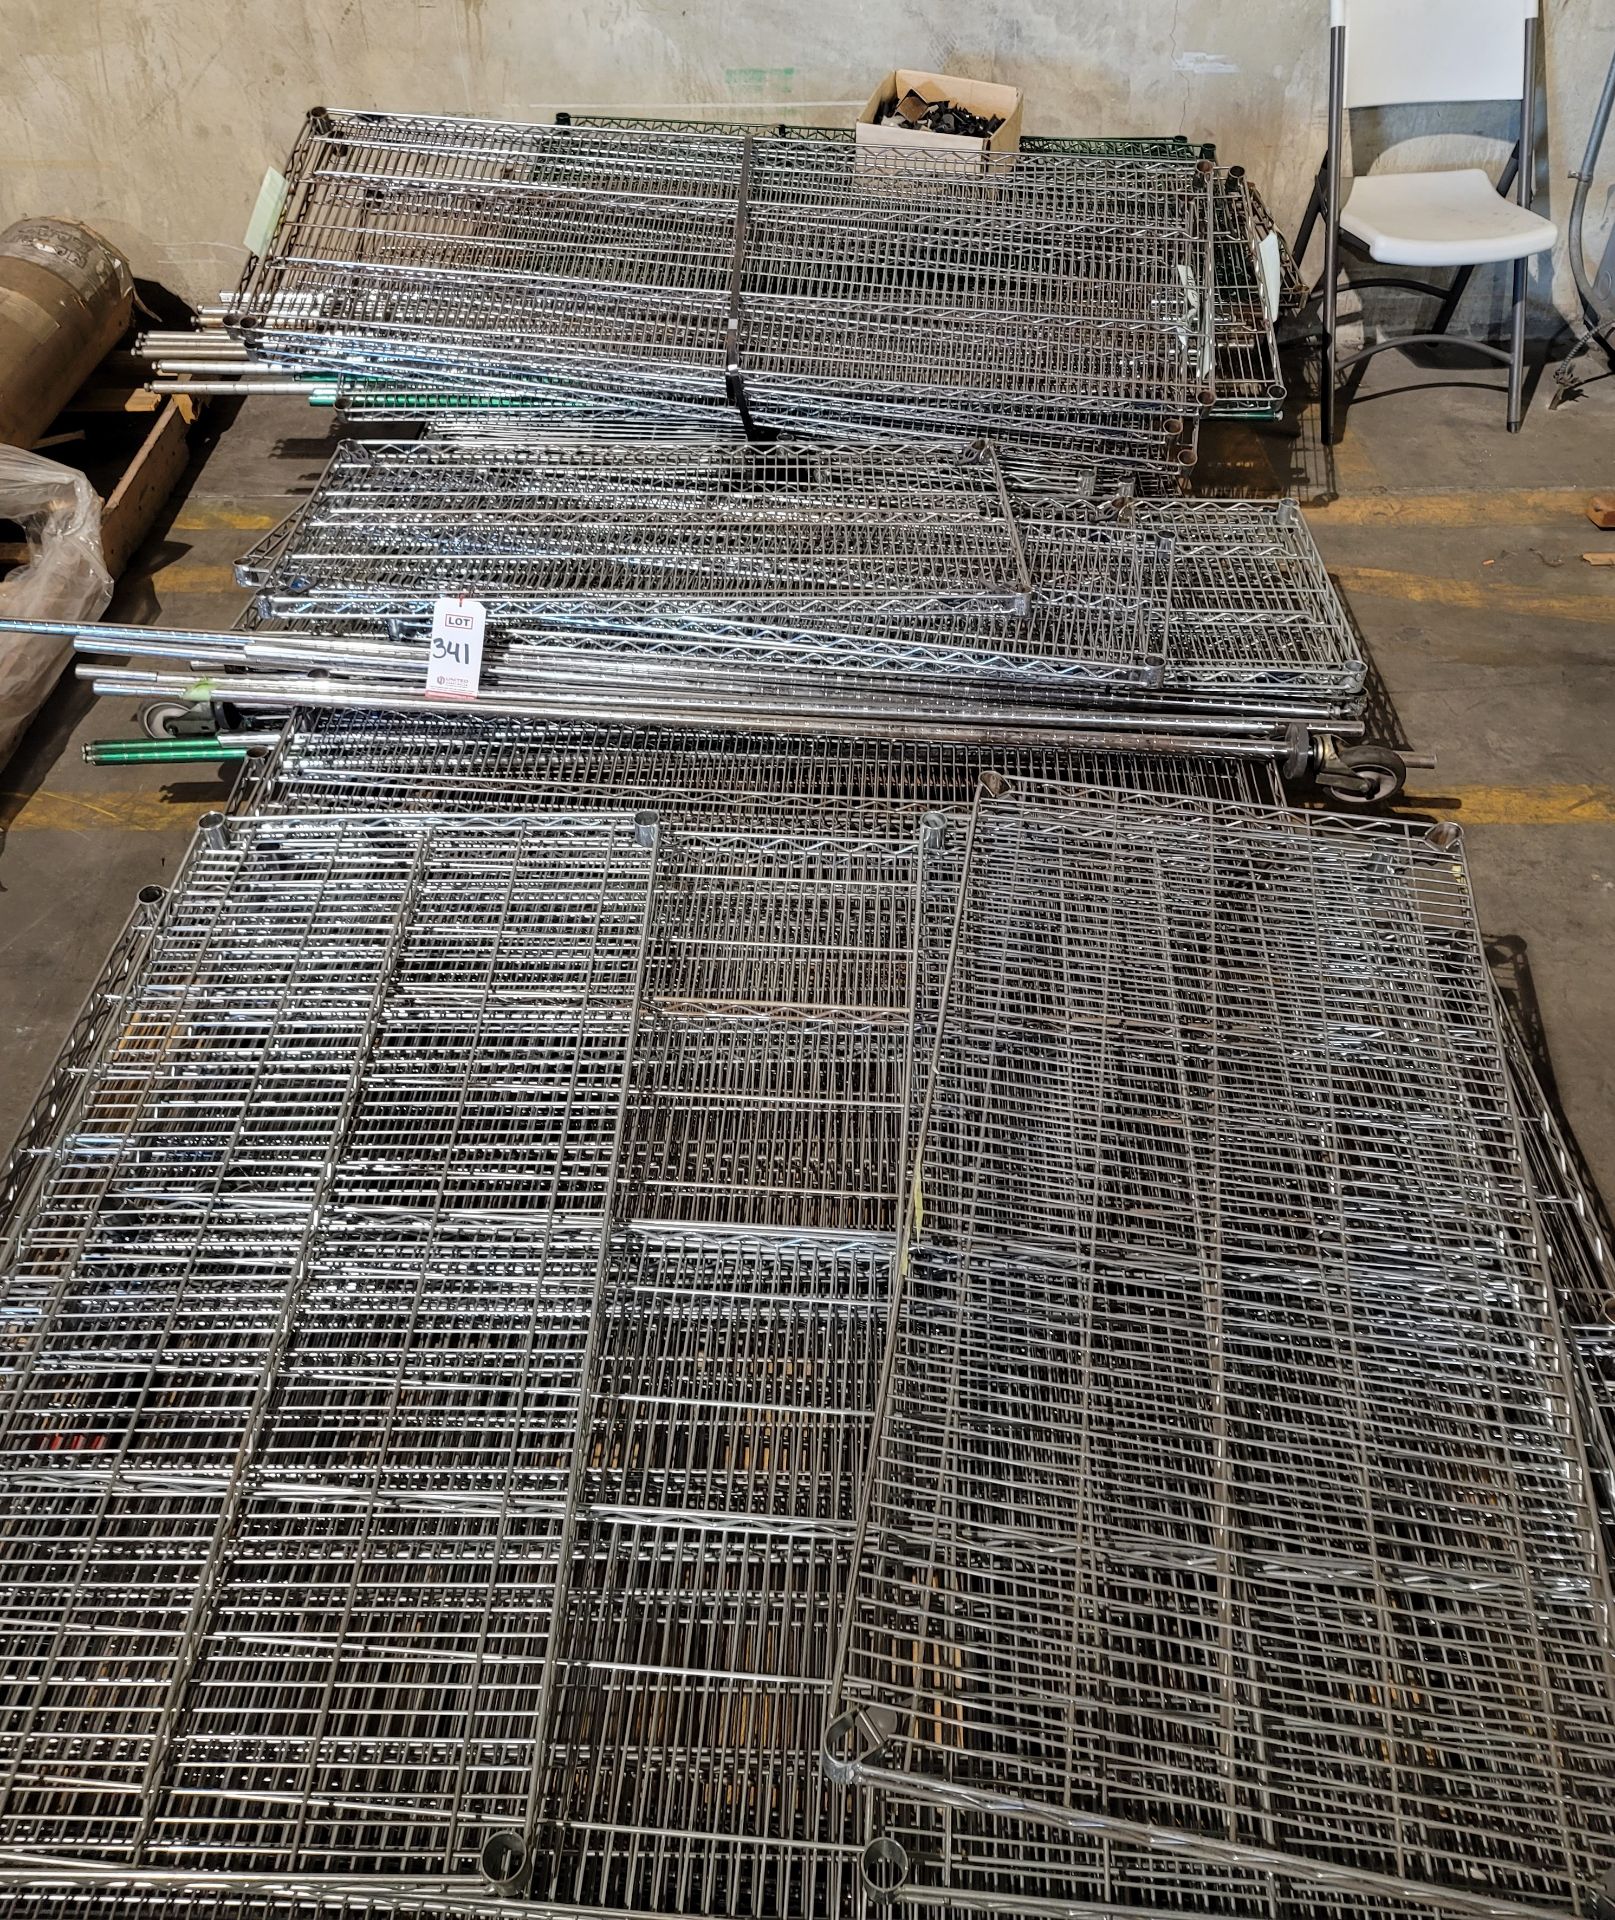 LOT - (3) OVERSIZE PALLETS OF DISASSEMBLED WIRE RACK (LOCATION: BUILDING 15 MRB)